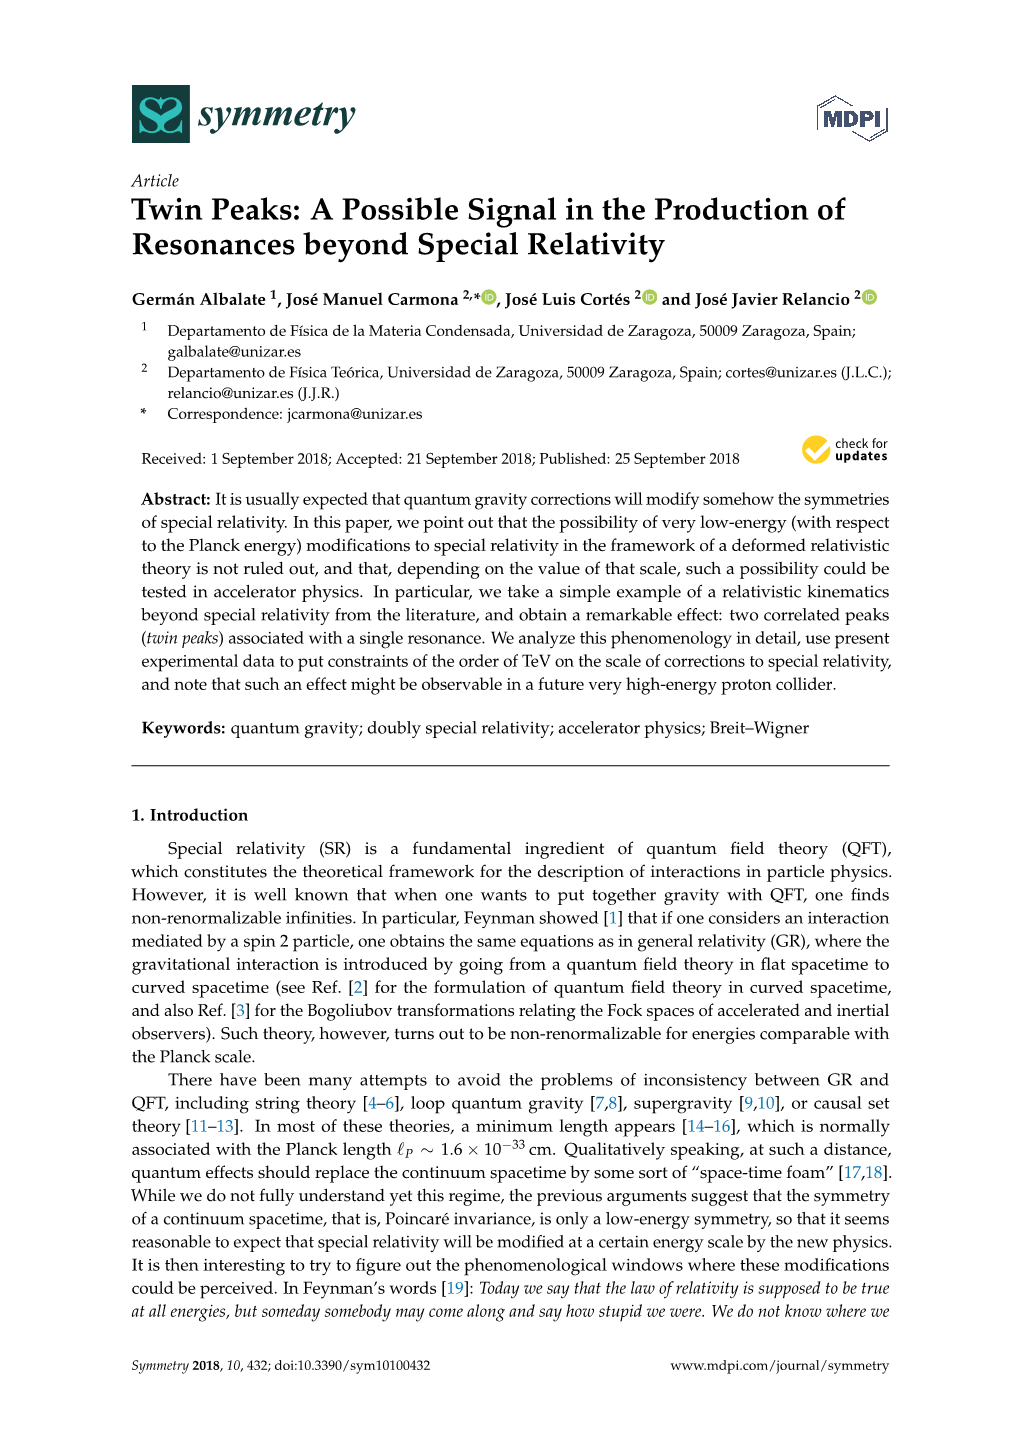 Twin Peaks: a Possible Signal in the Production of Resonances Beyond Special Relativity